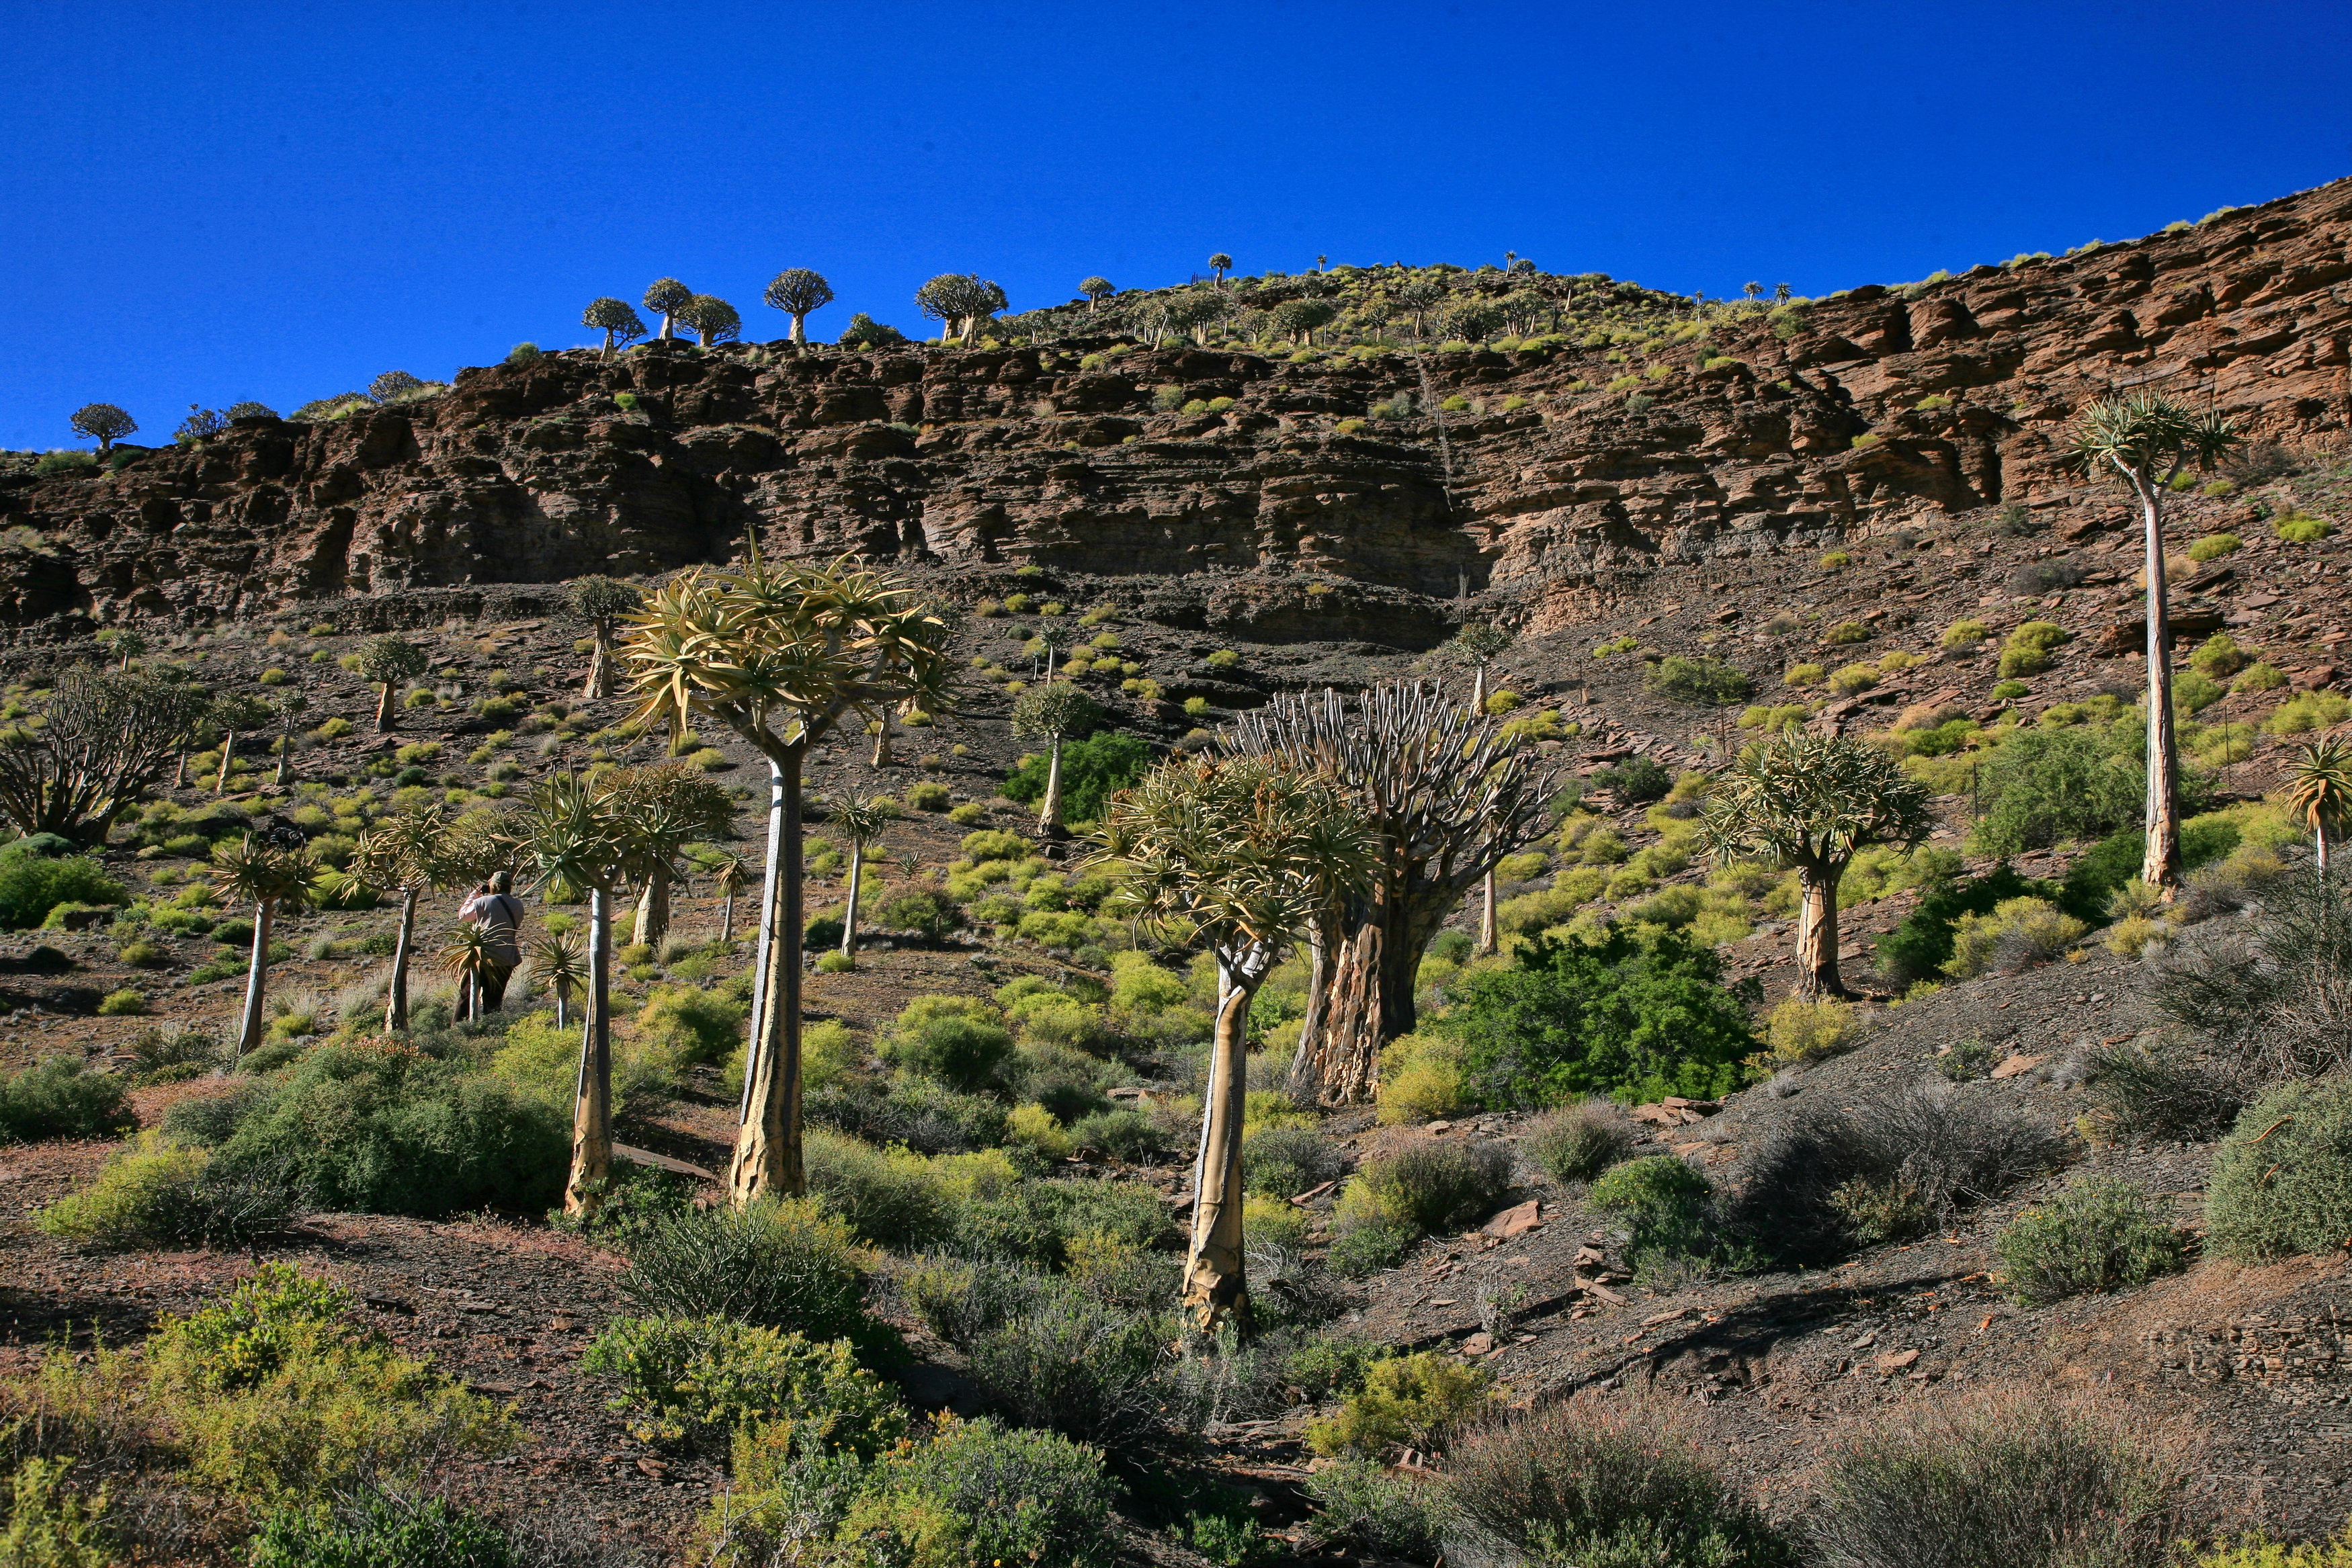 The Quiver Tree Forest between Loeriesfontein and Nieuwoudtville.